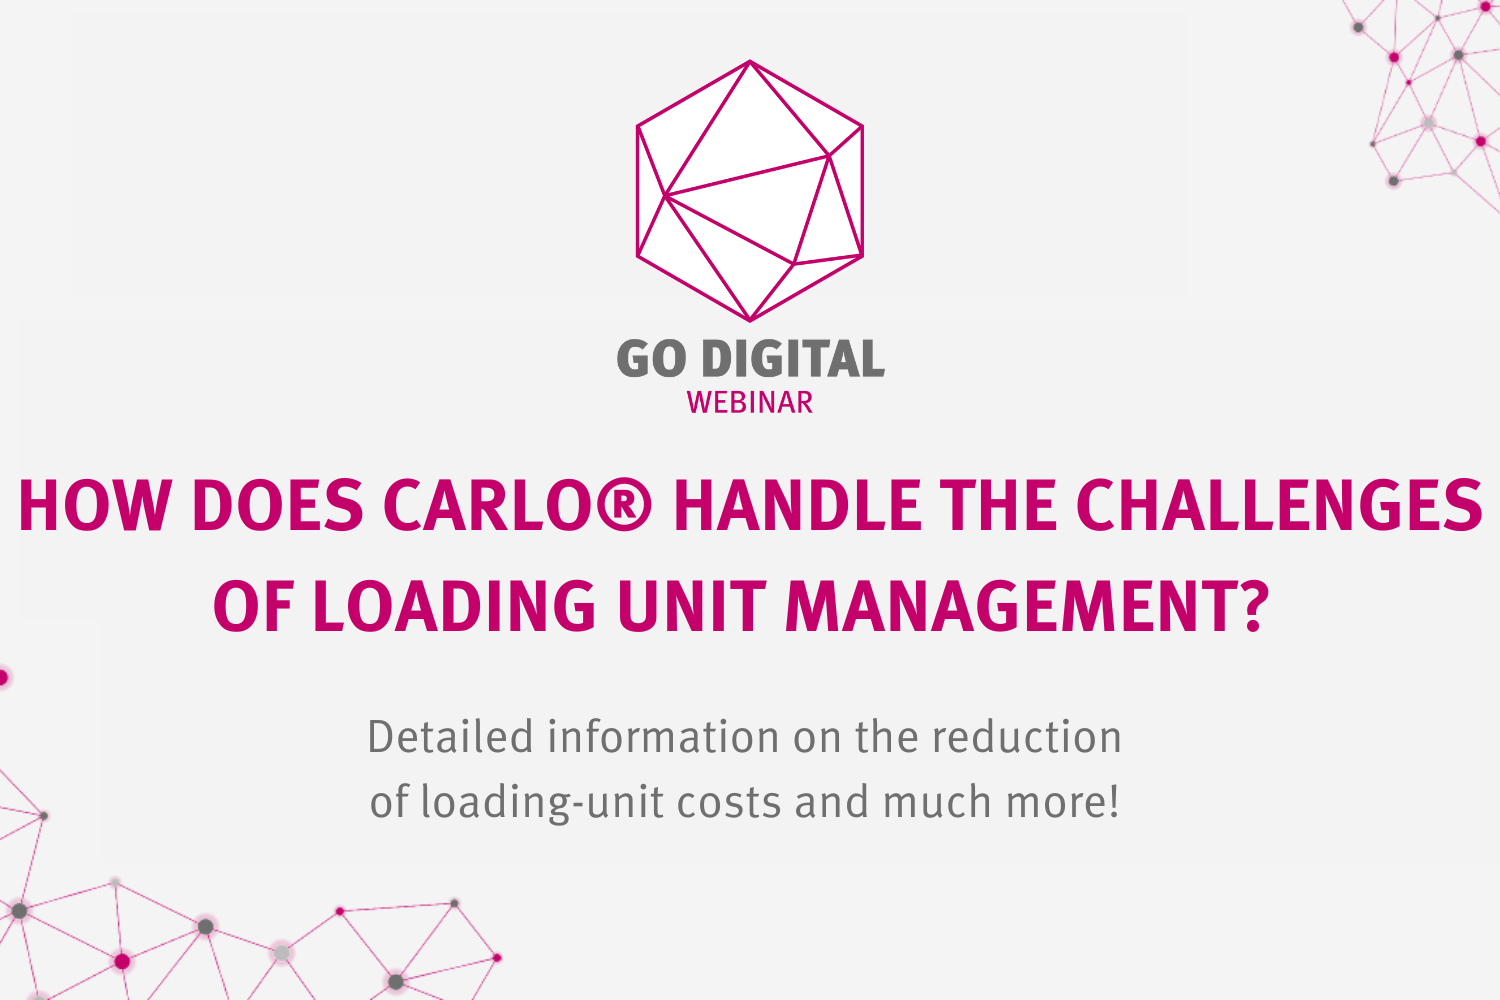 GO DIGITAL: How does CarLo® handle the challenges of loading unit management?